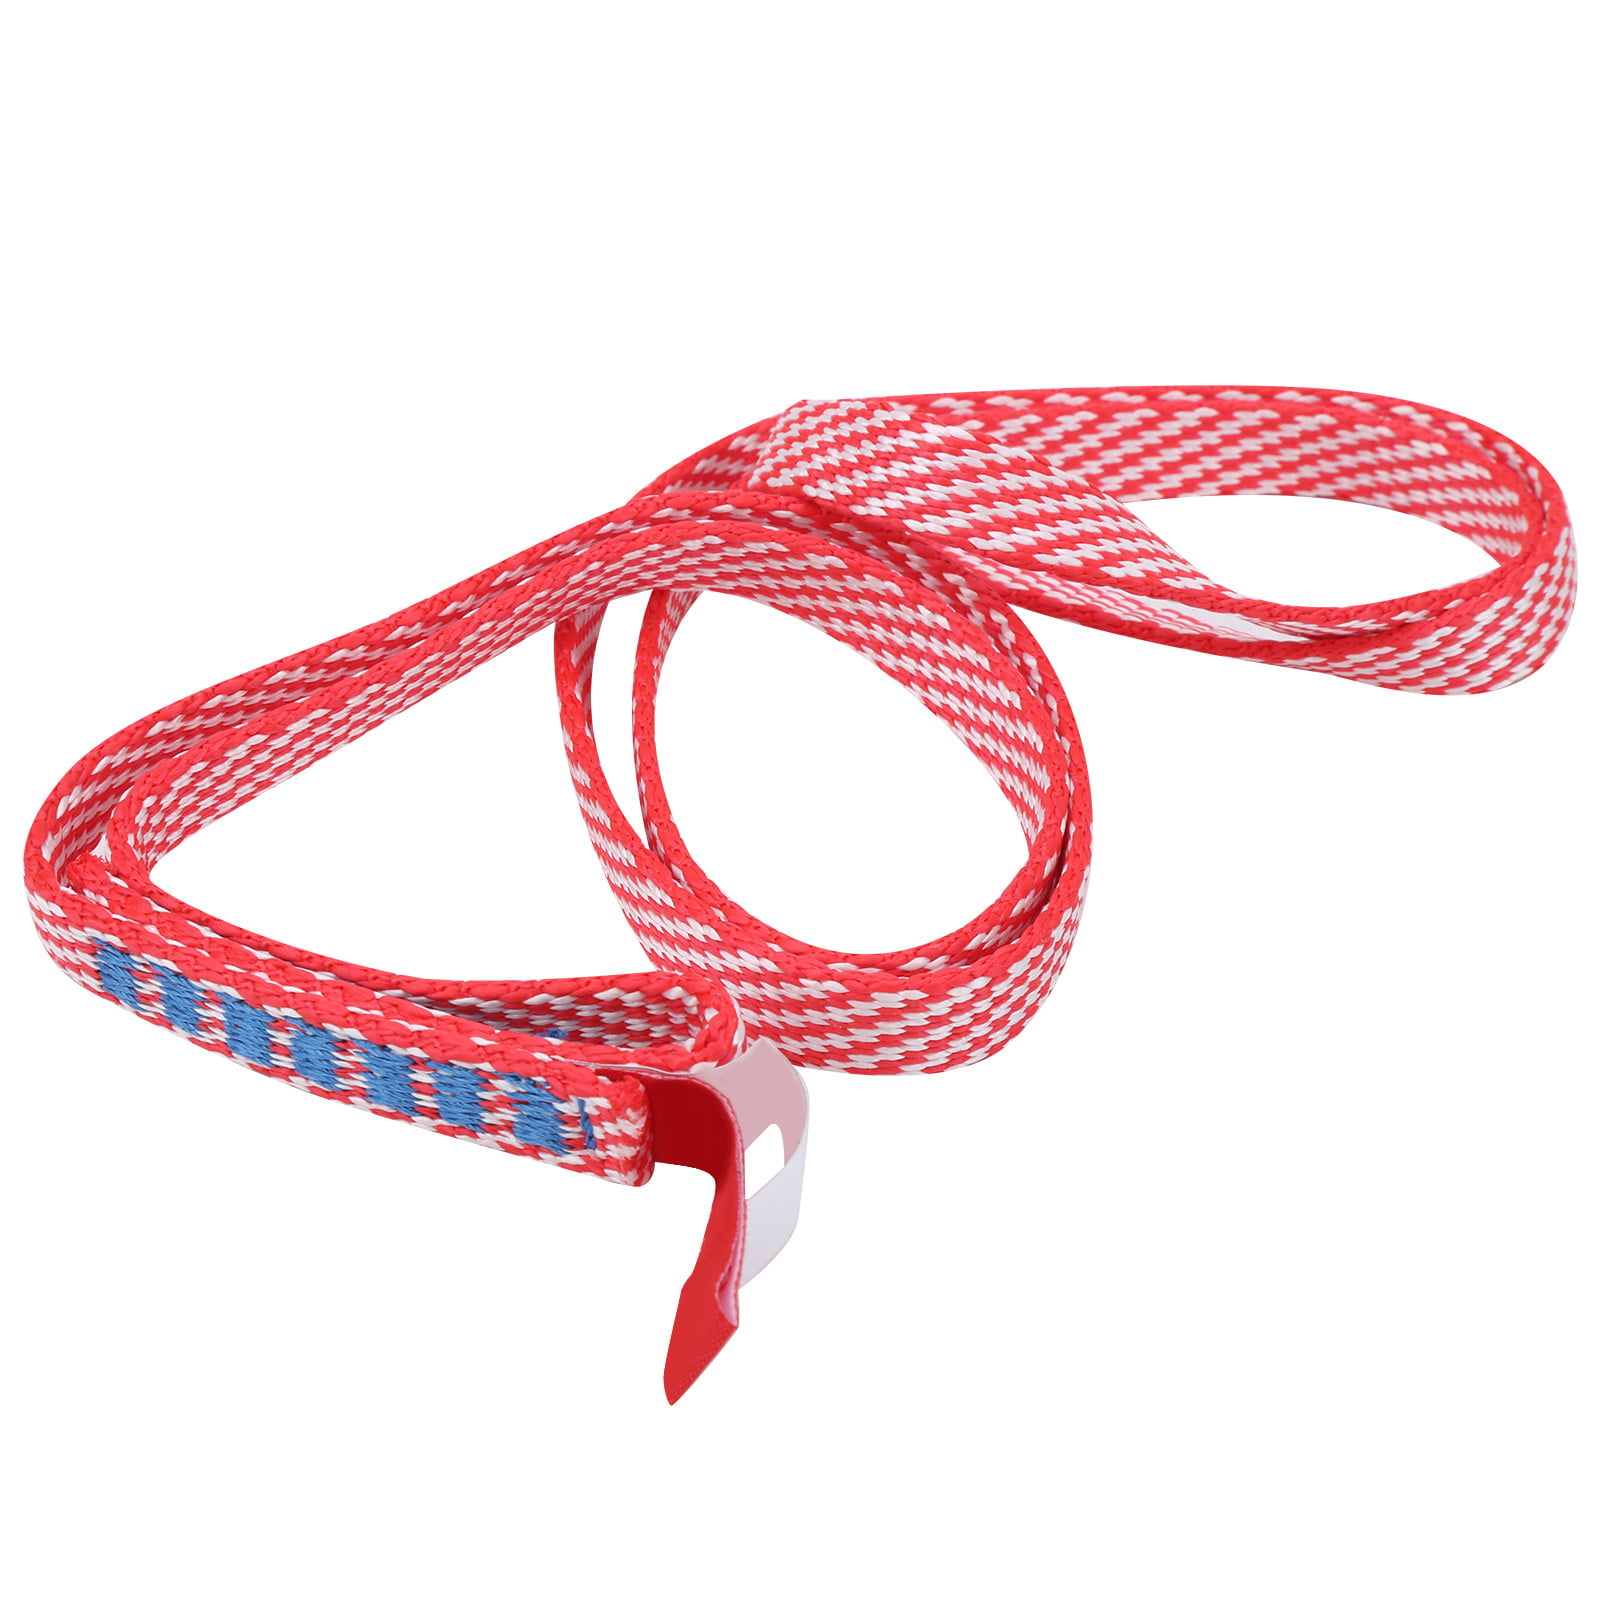 Details about   1Pc Camnal 60CM Outdoor Rock Climbing Sling Belt Belts Mountaineering Flat Rope 